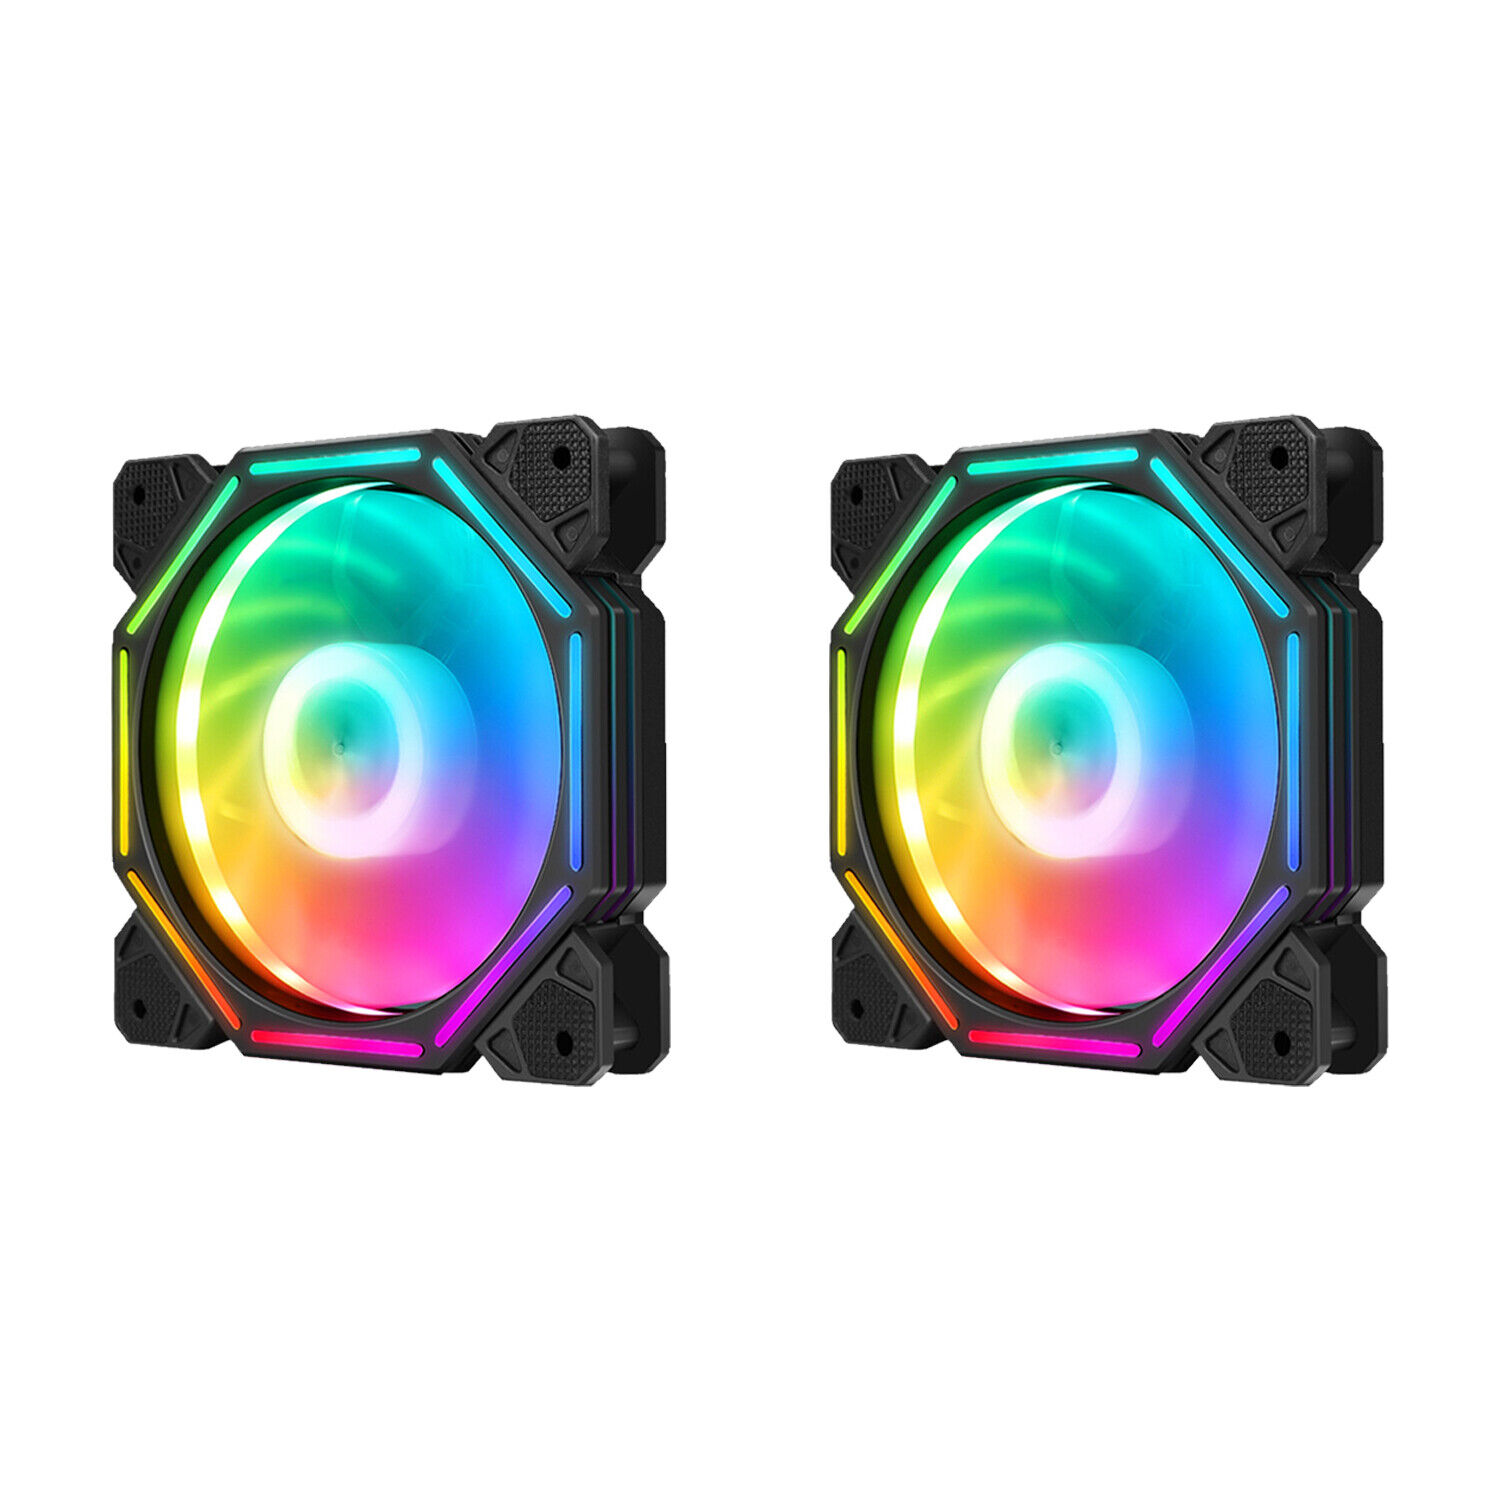 1-5Pack 120mm RGB Computer Case Fan Quiet PC Air Cooling RGB Fans Gaming Cooler